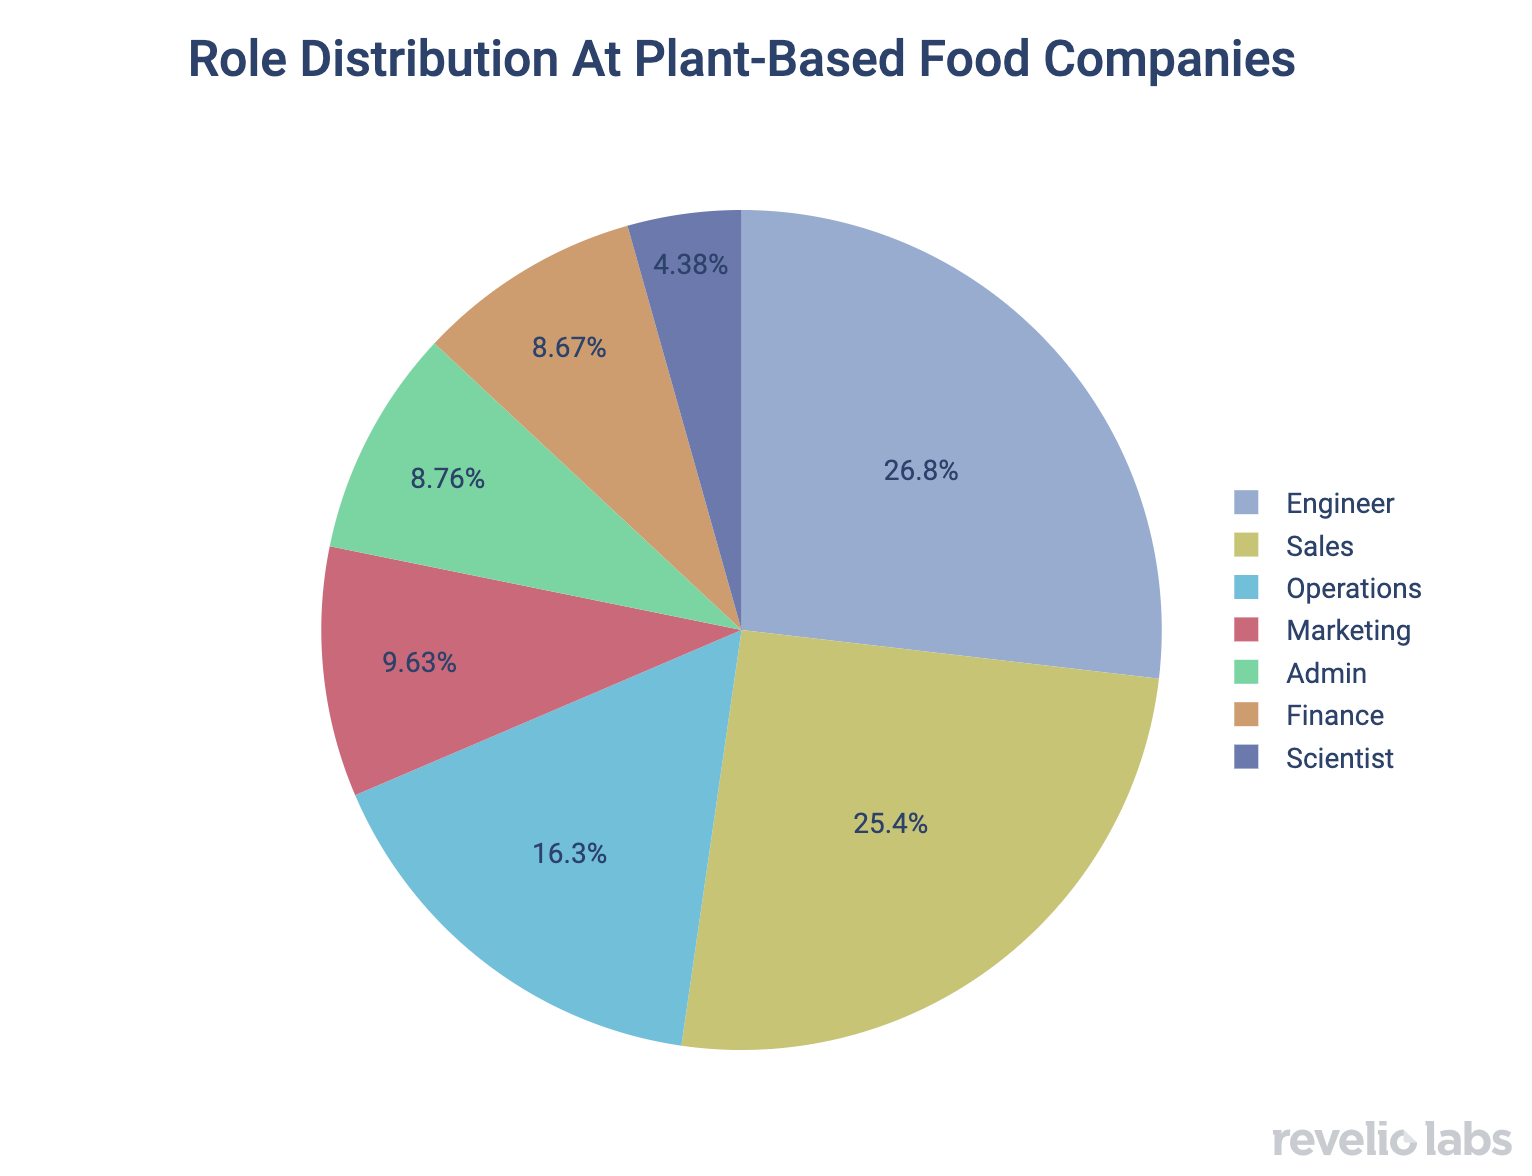 Role Distribution at Plant-Based Food Companies